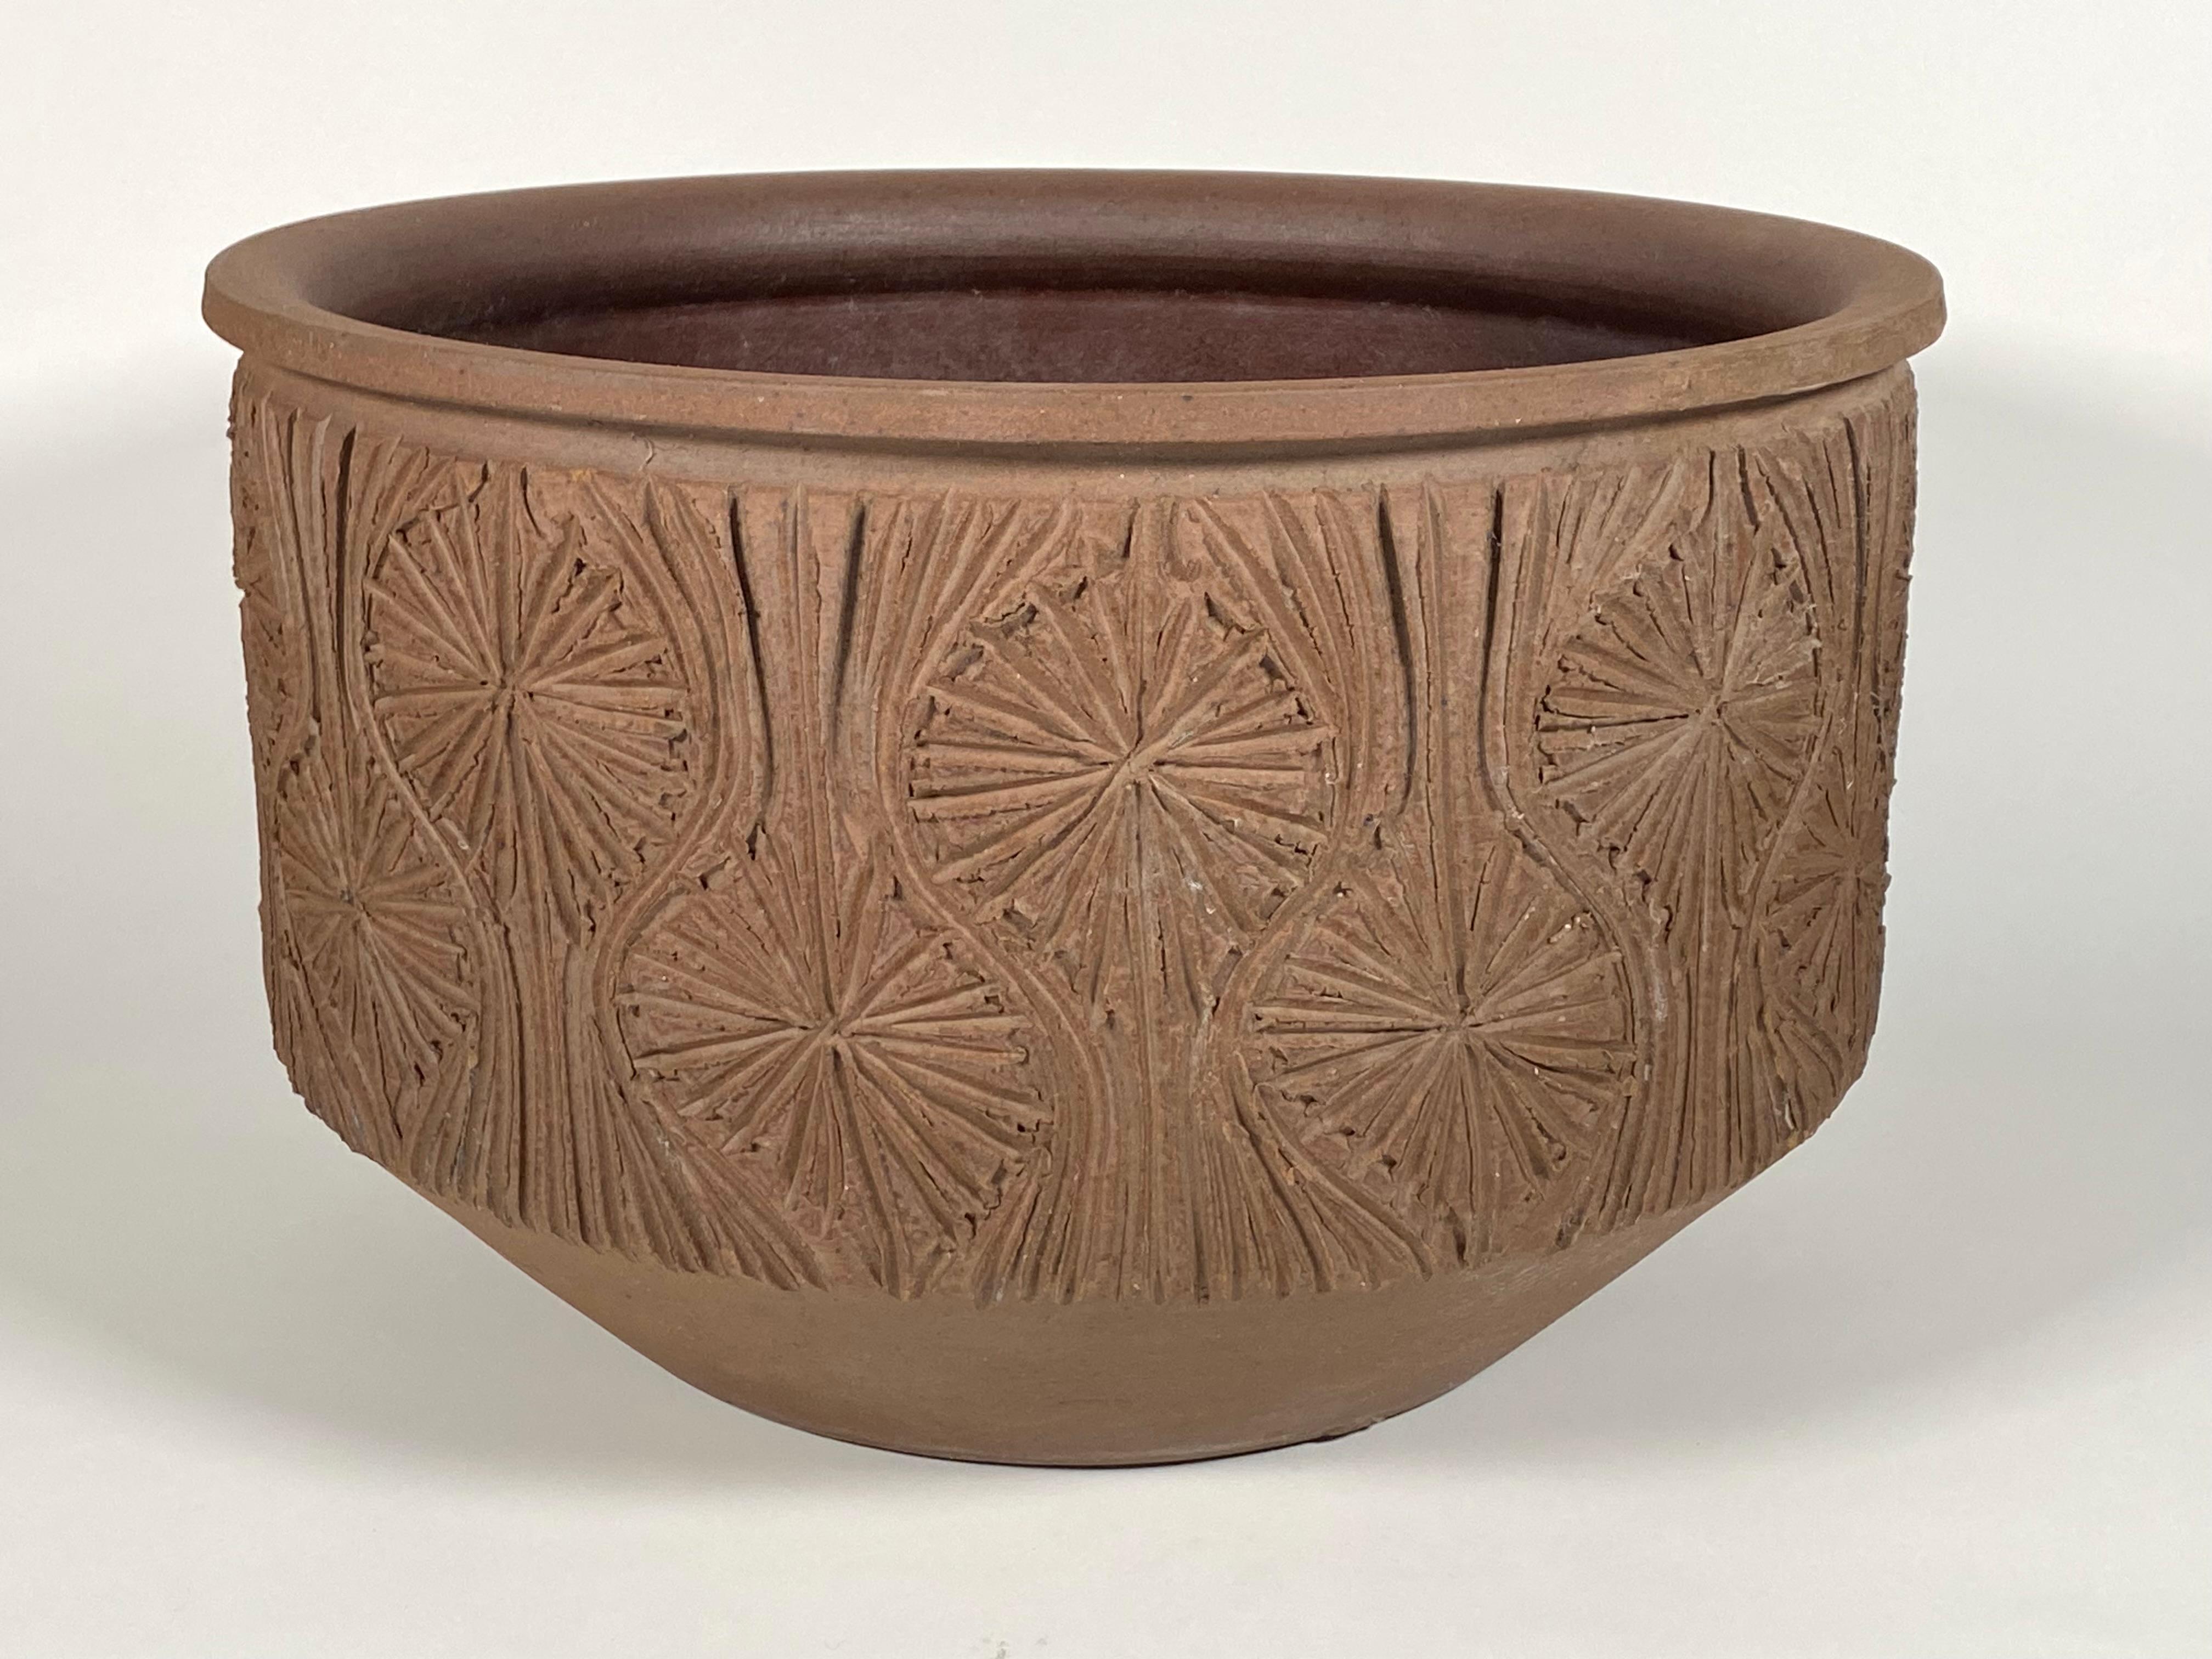 Large stoneware garden planter by Robert Maxwell and David Cressey for Earthgender Ceramics of Southern California during the 1960s. Having a rich brown textural ceramic body with incised patterns into the clay all around the circumference of the